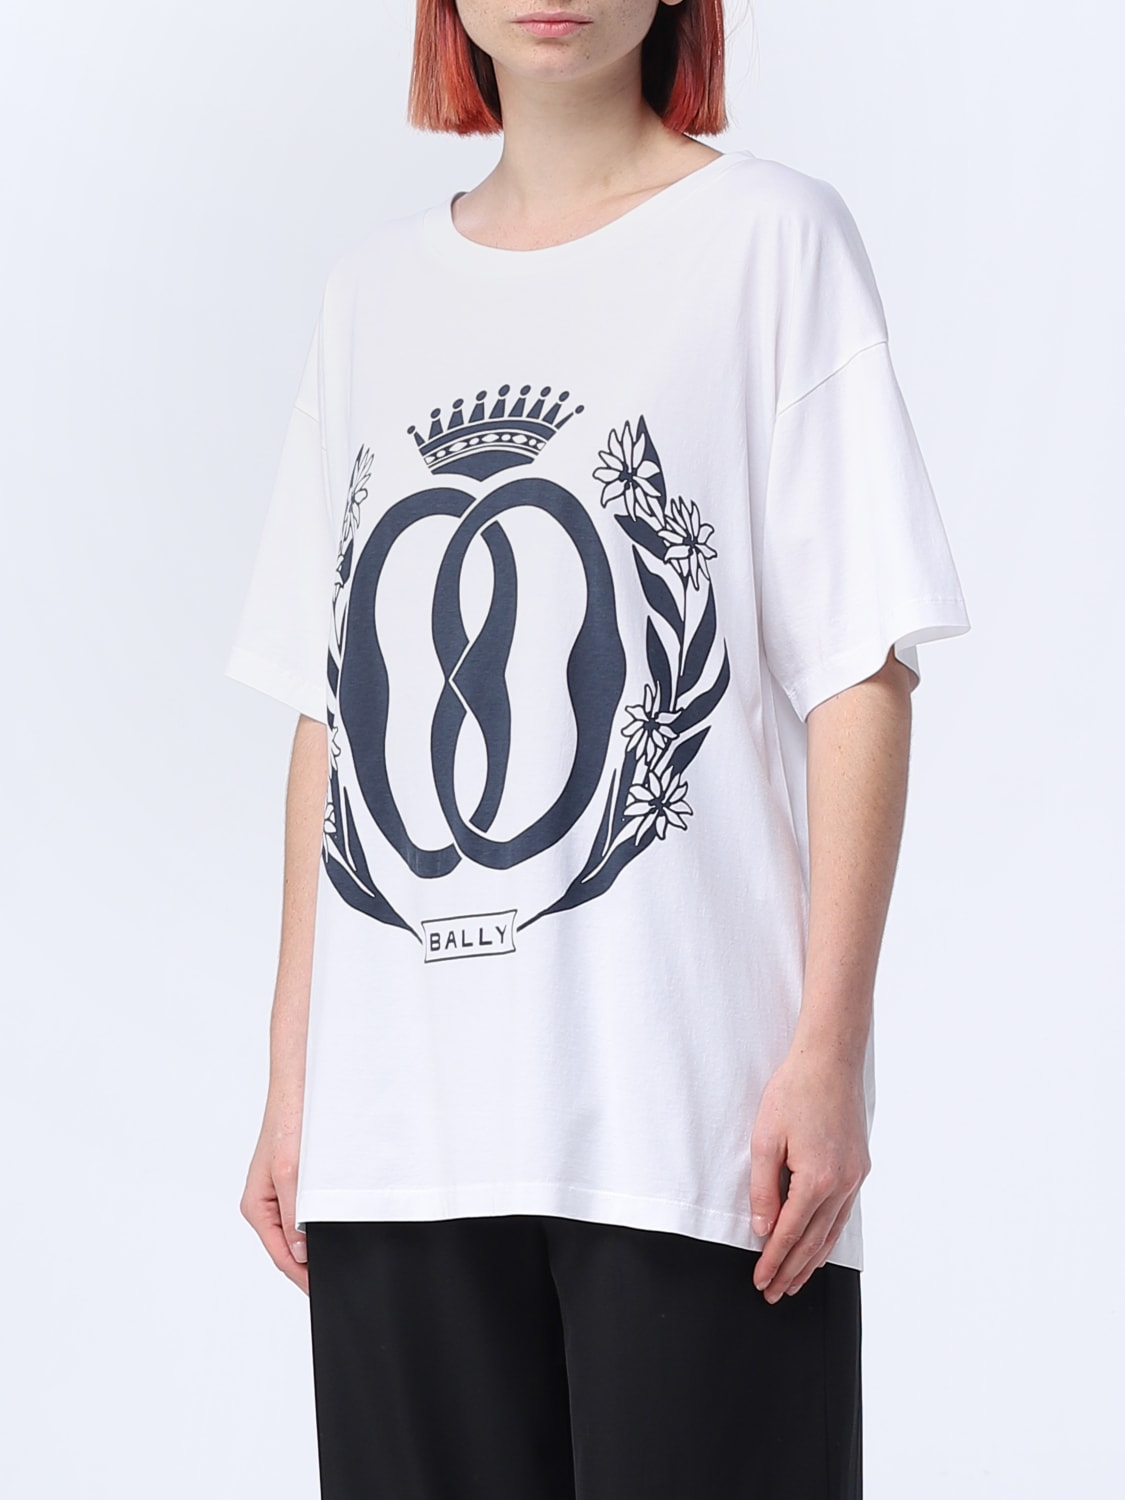 BALLY: t-shirt for woman - White | Bally t-shirt MJE03ECO018 online on ...